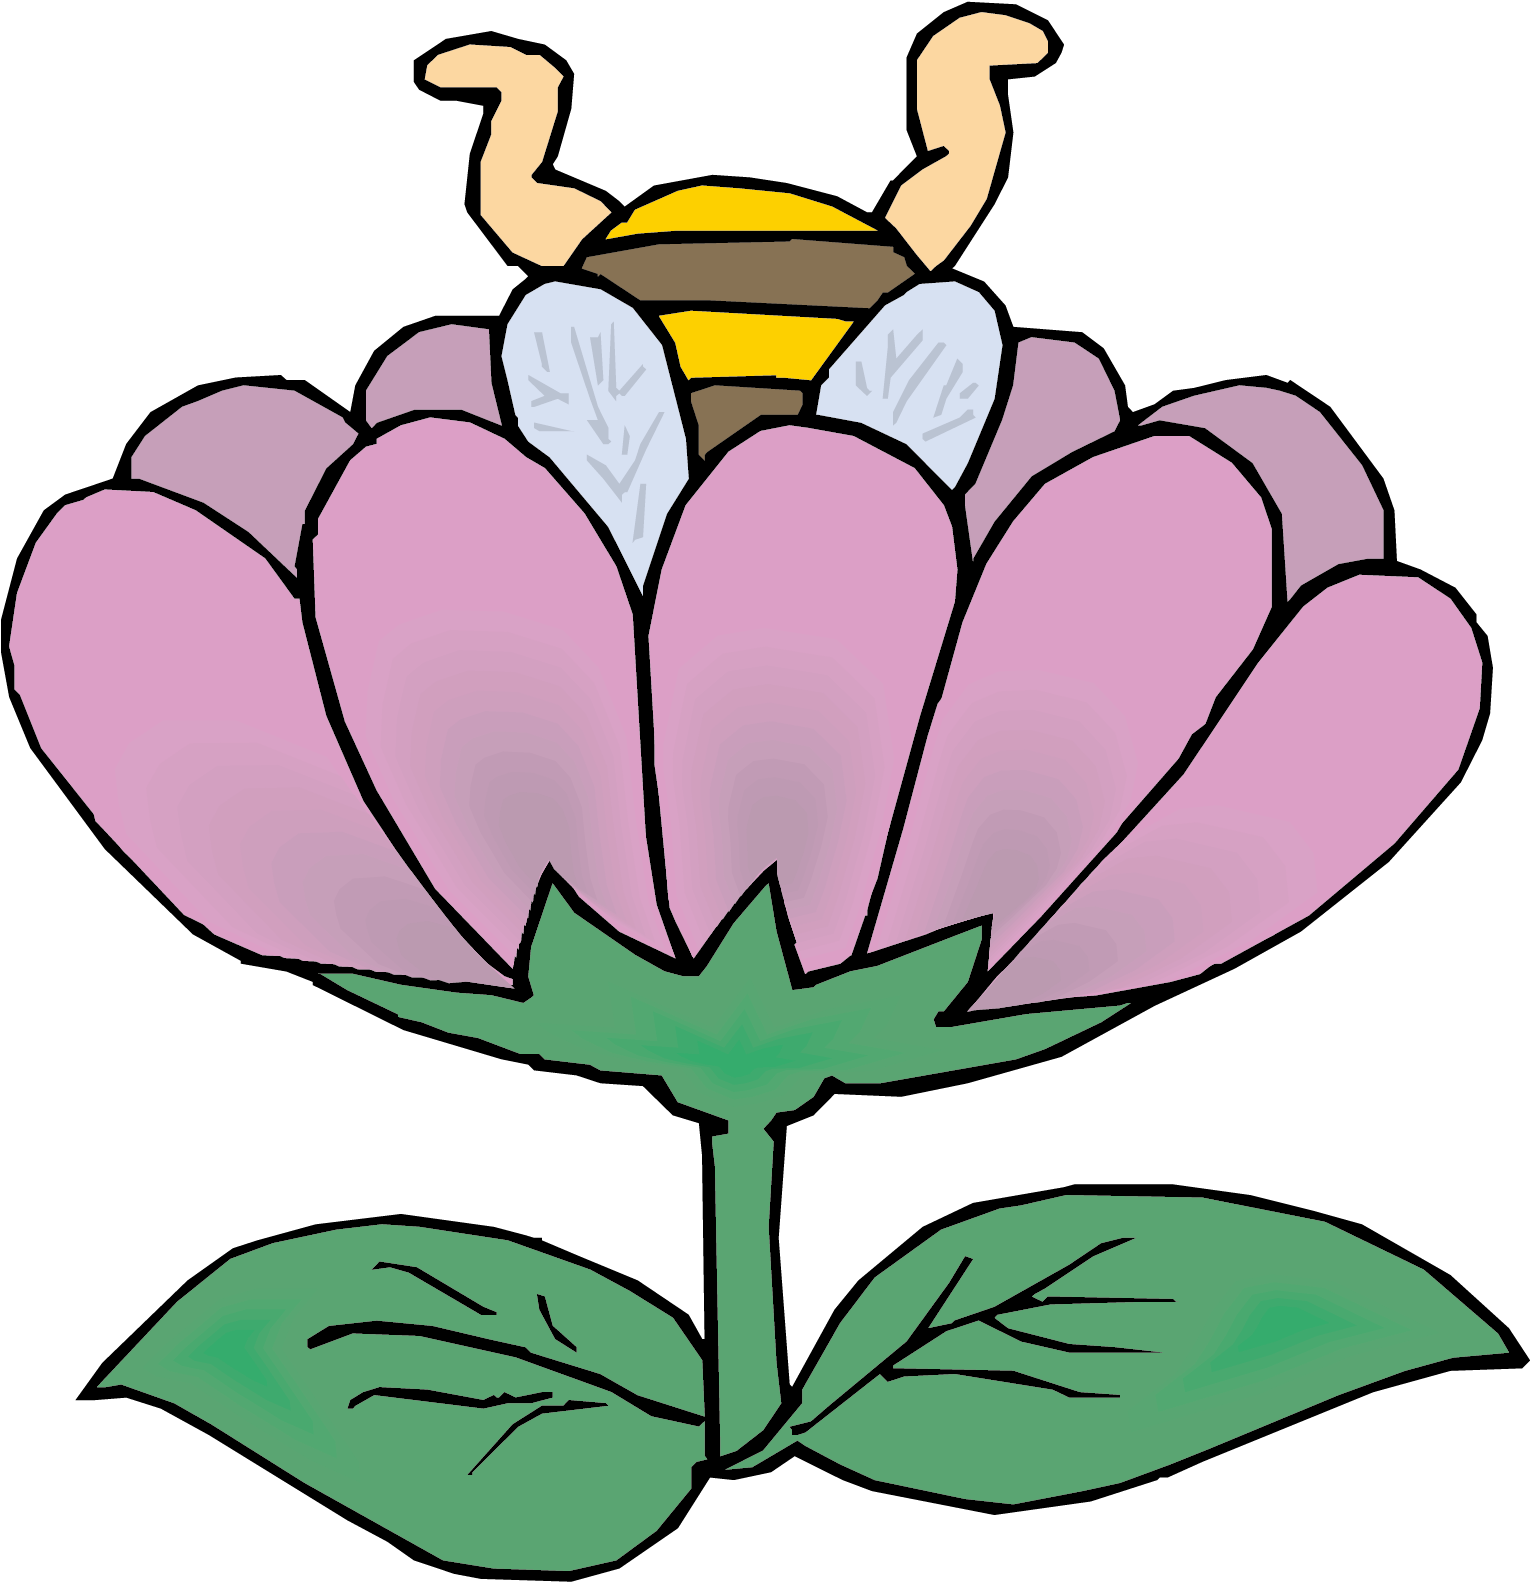 Honey Bee Animation Flower - Bee And Flower Animation (1837x1656)